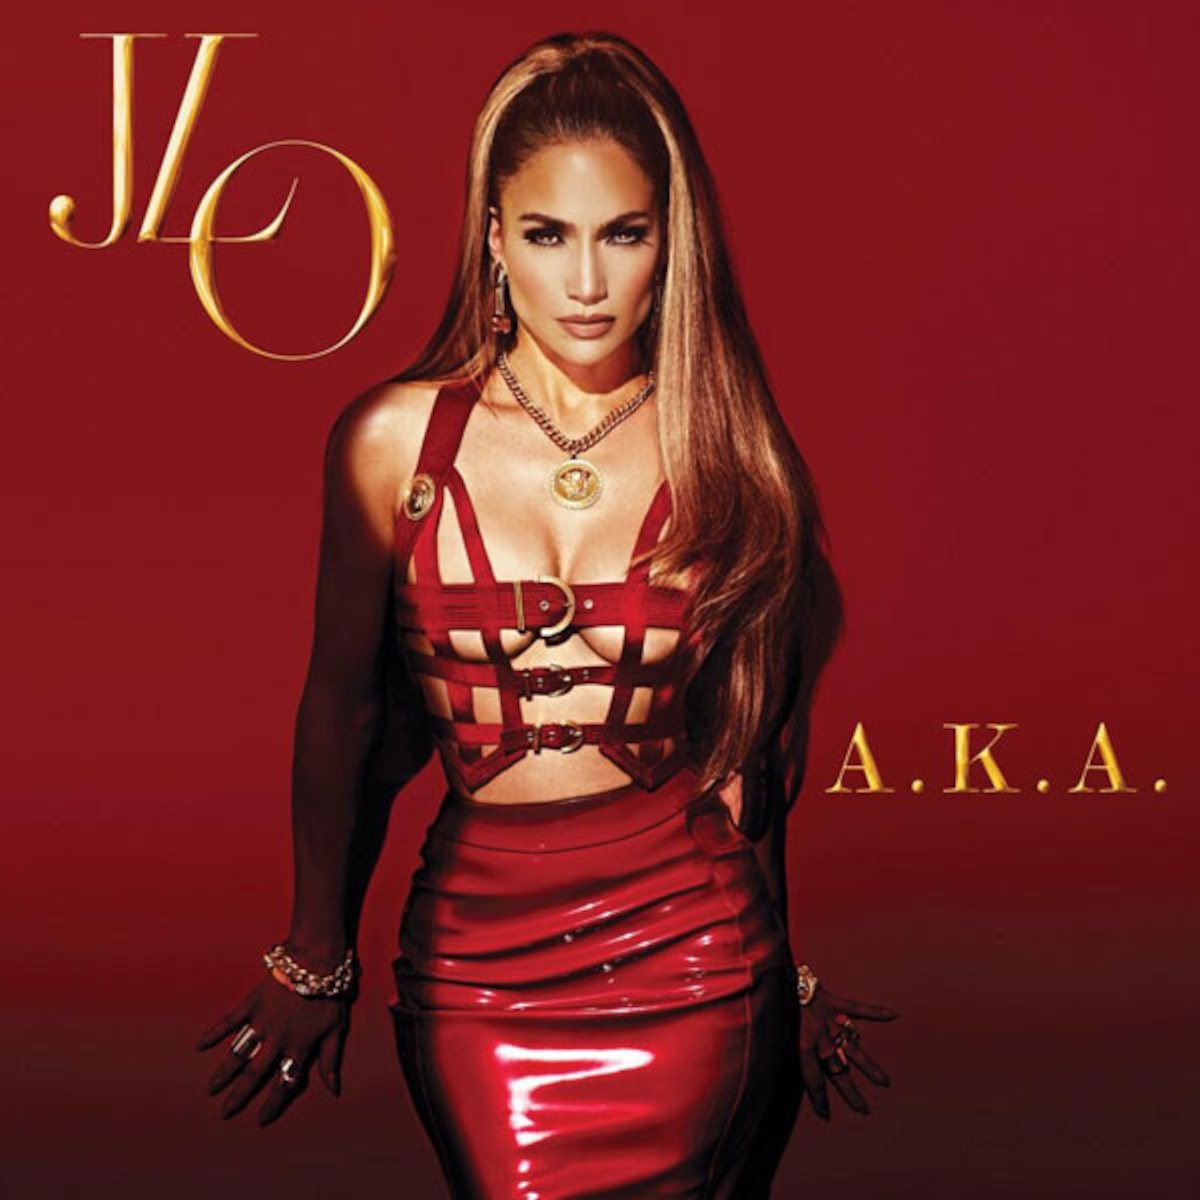 Jennifer Lopez Puts Her Cleavage on Display for A.K.A. Cover